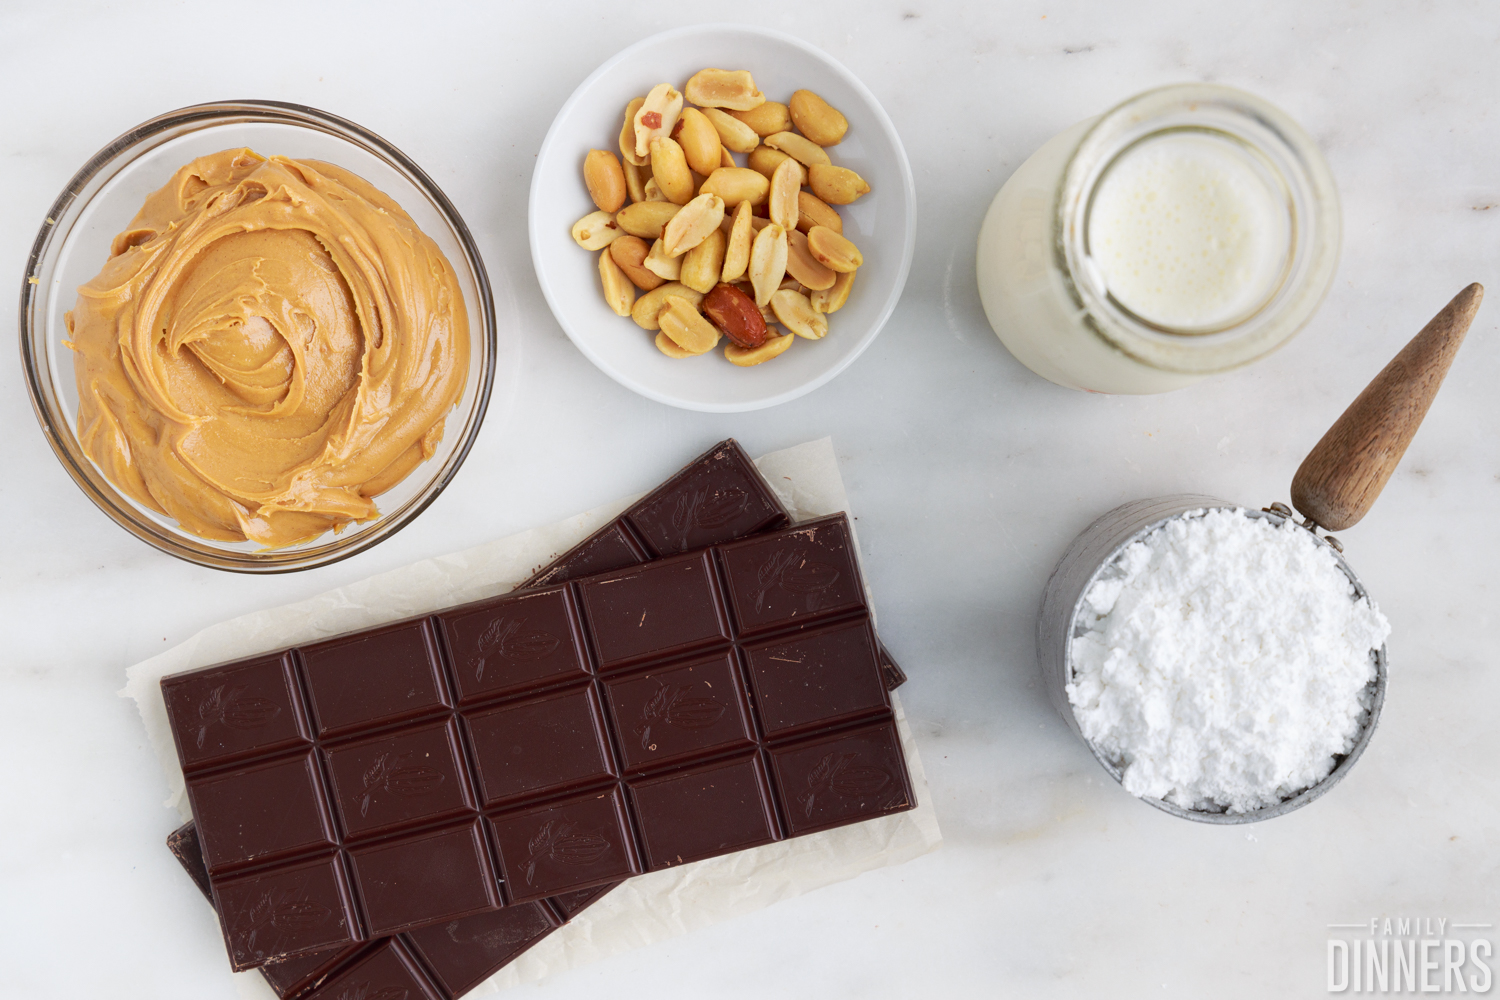 ingredients needed to make chocolate peanut butter truffles